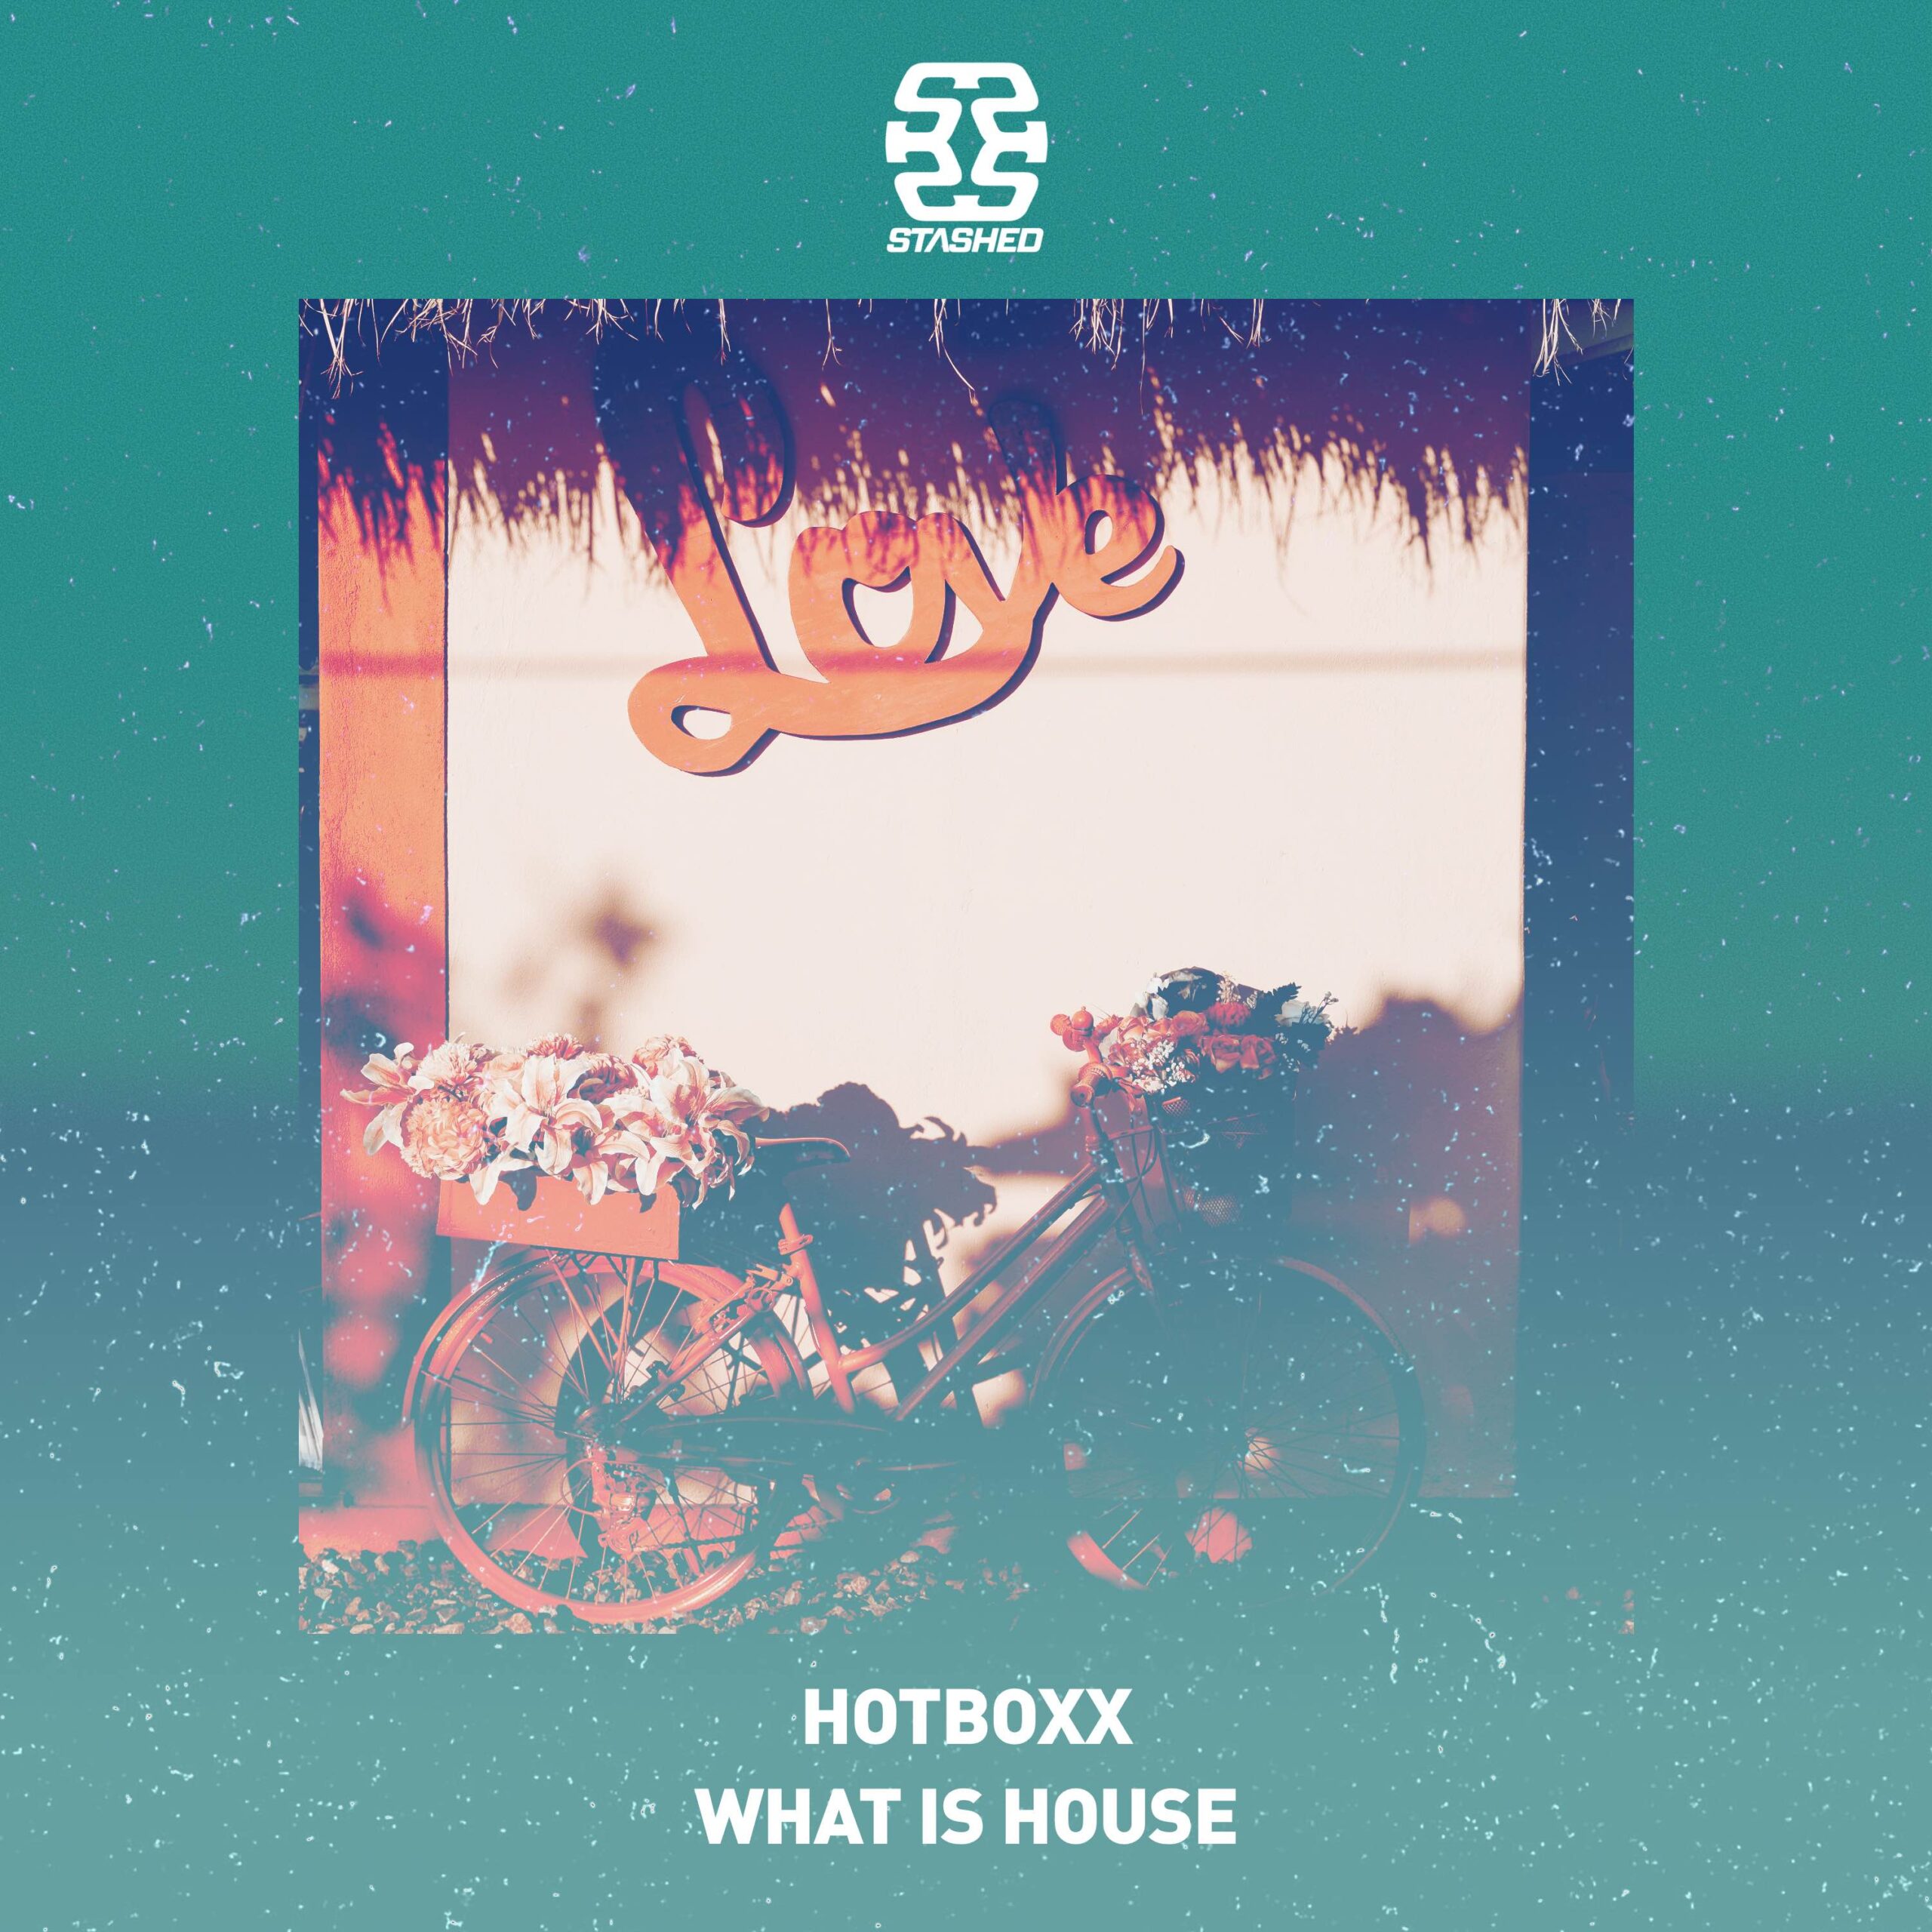 Hotboxx Shares Exciting House Track ‘What Is House'